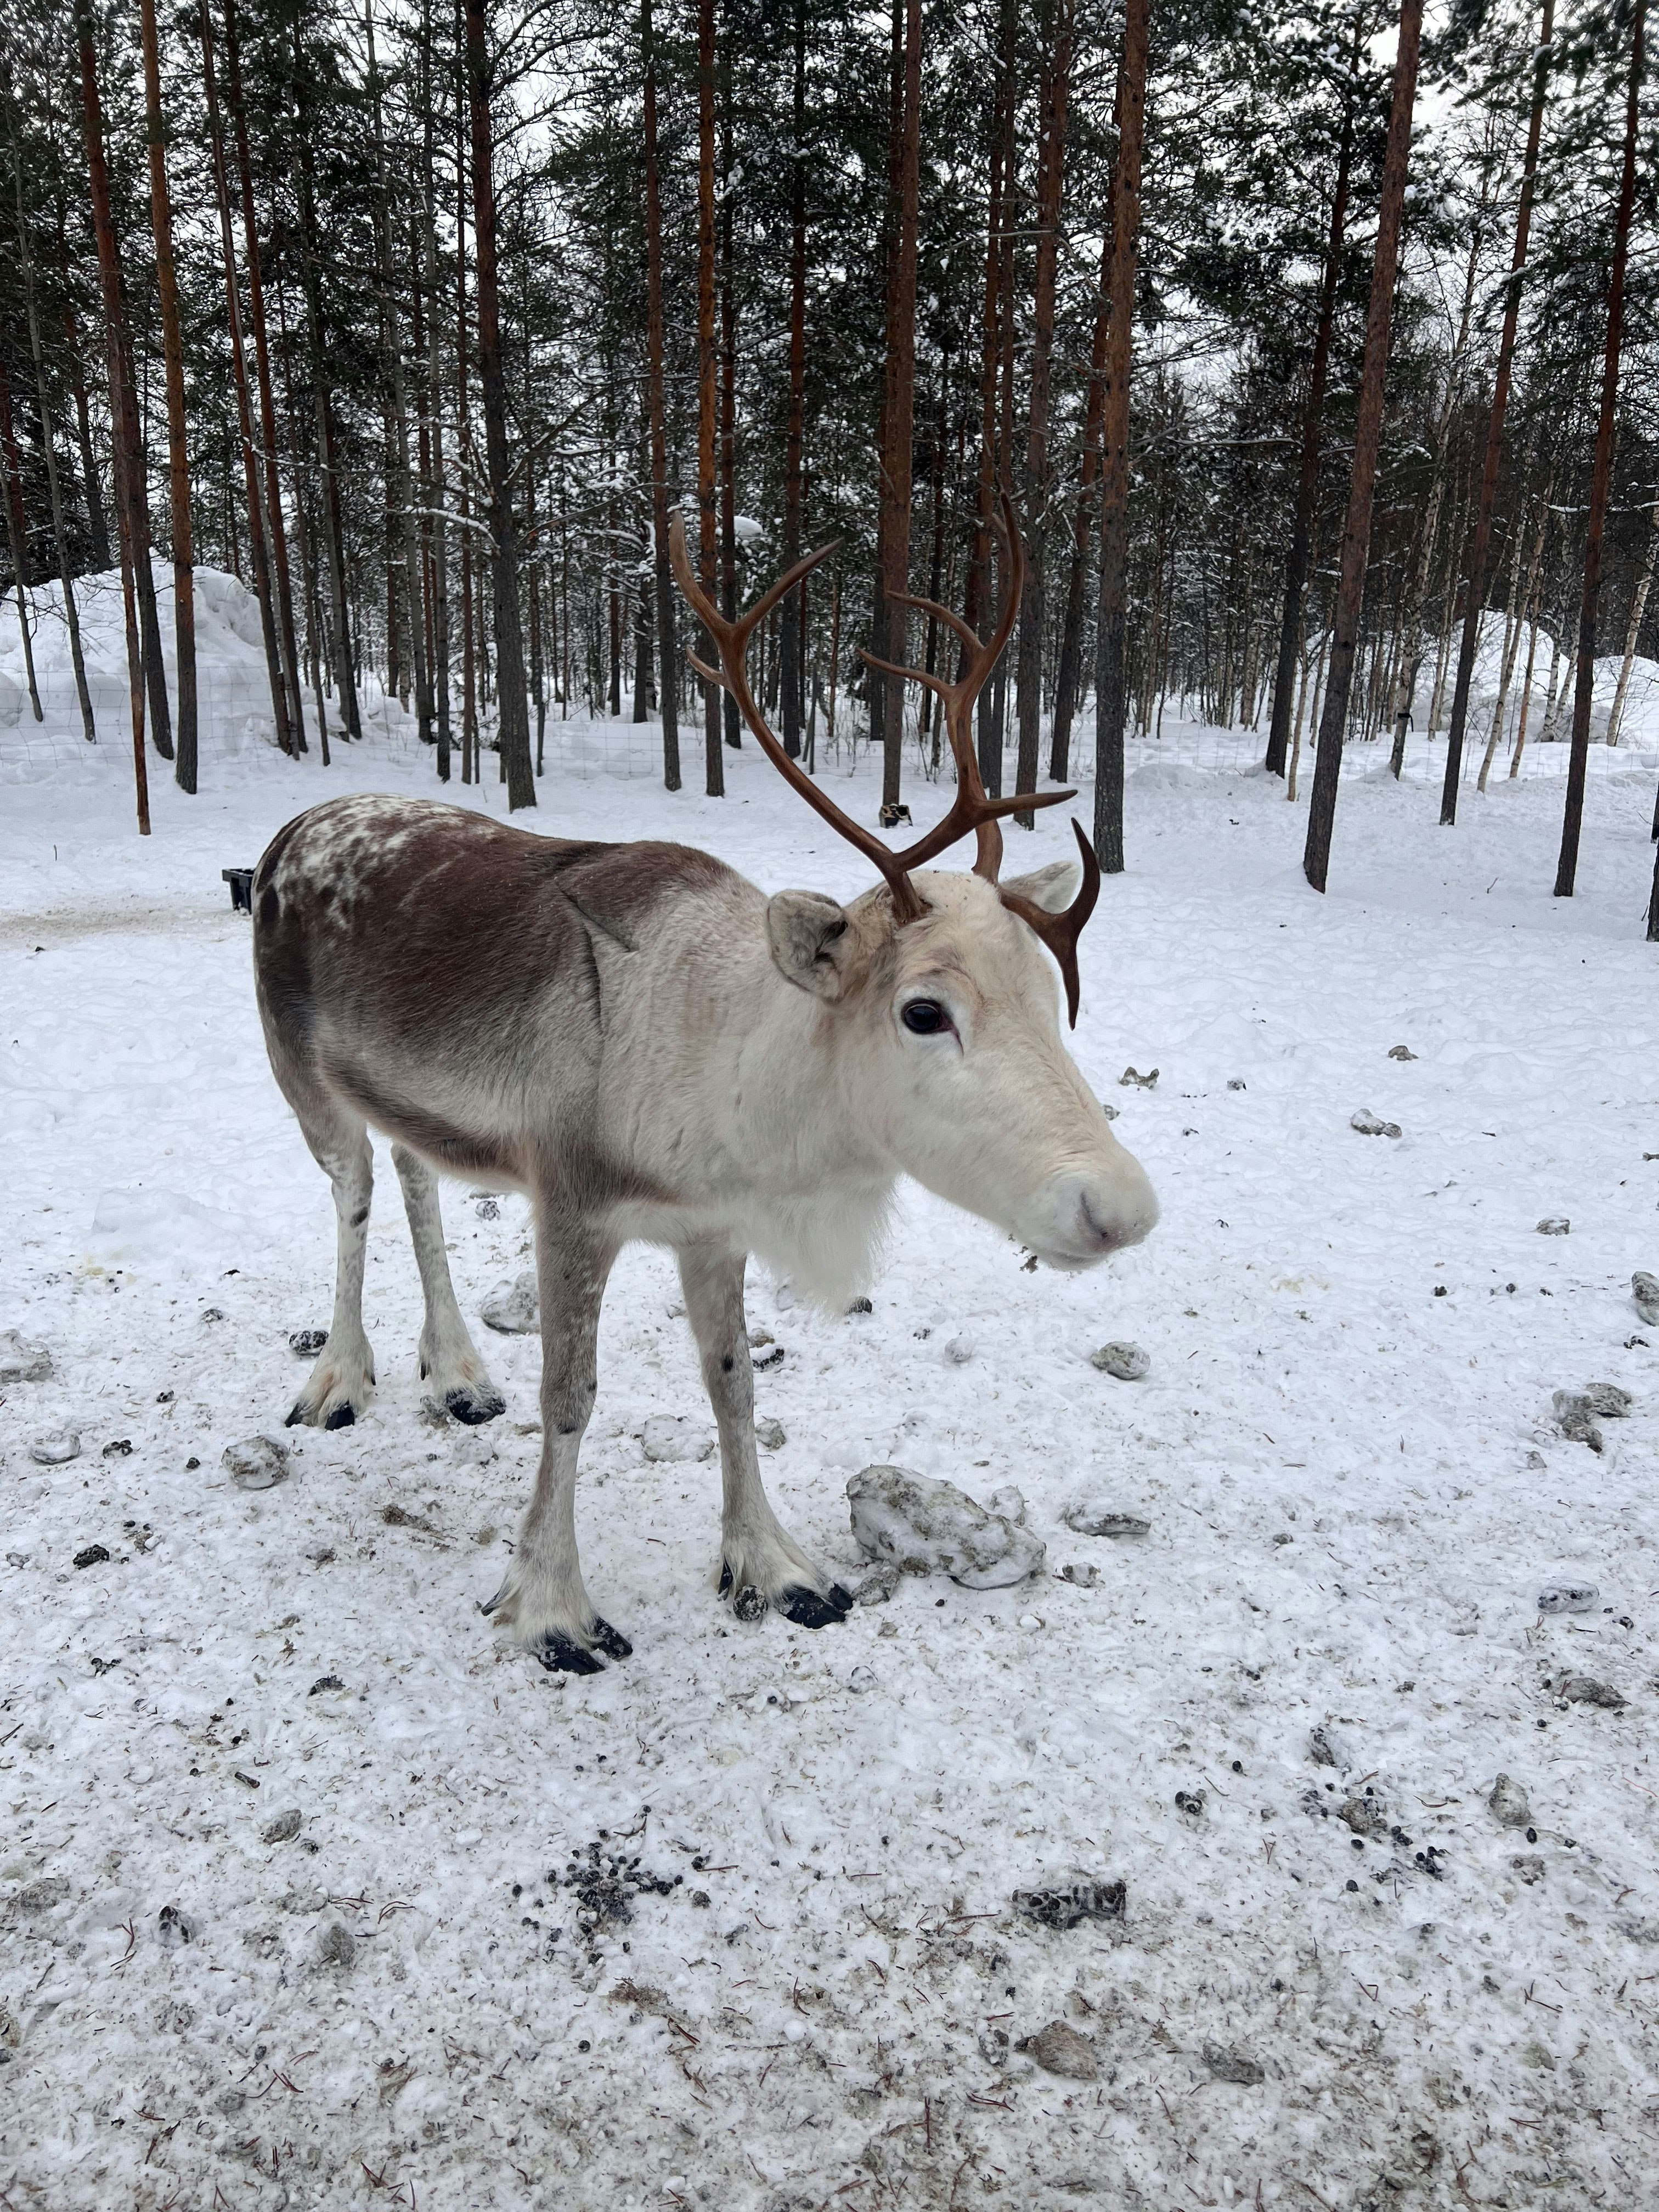 Arctic Snow Hotel reindeer at Rovaniemi's Arctic SnowHotel is in Lapland, Finland. Deepa Lakshmin/Lonely Planet.